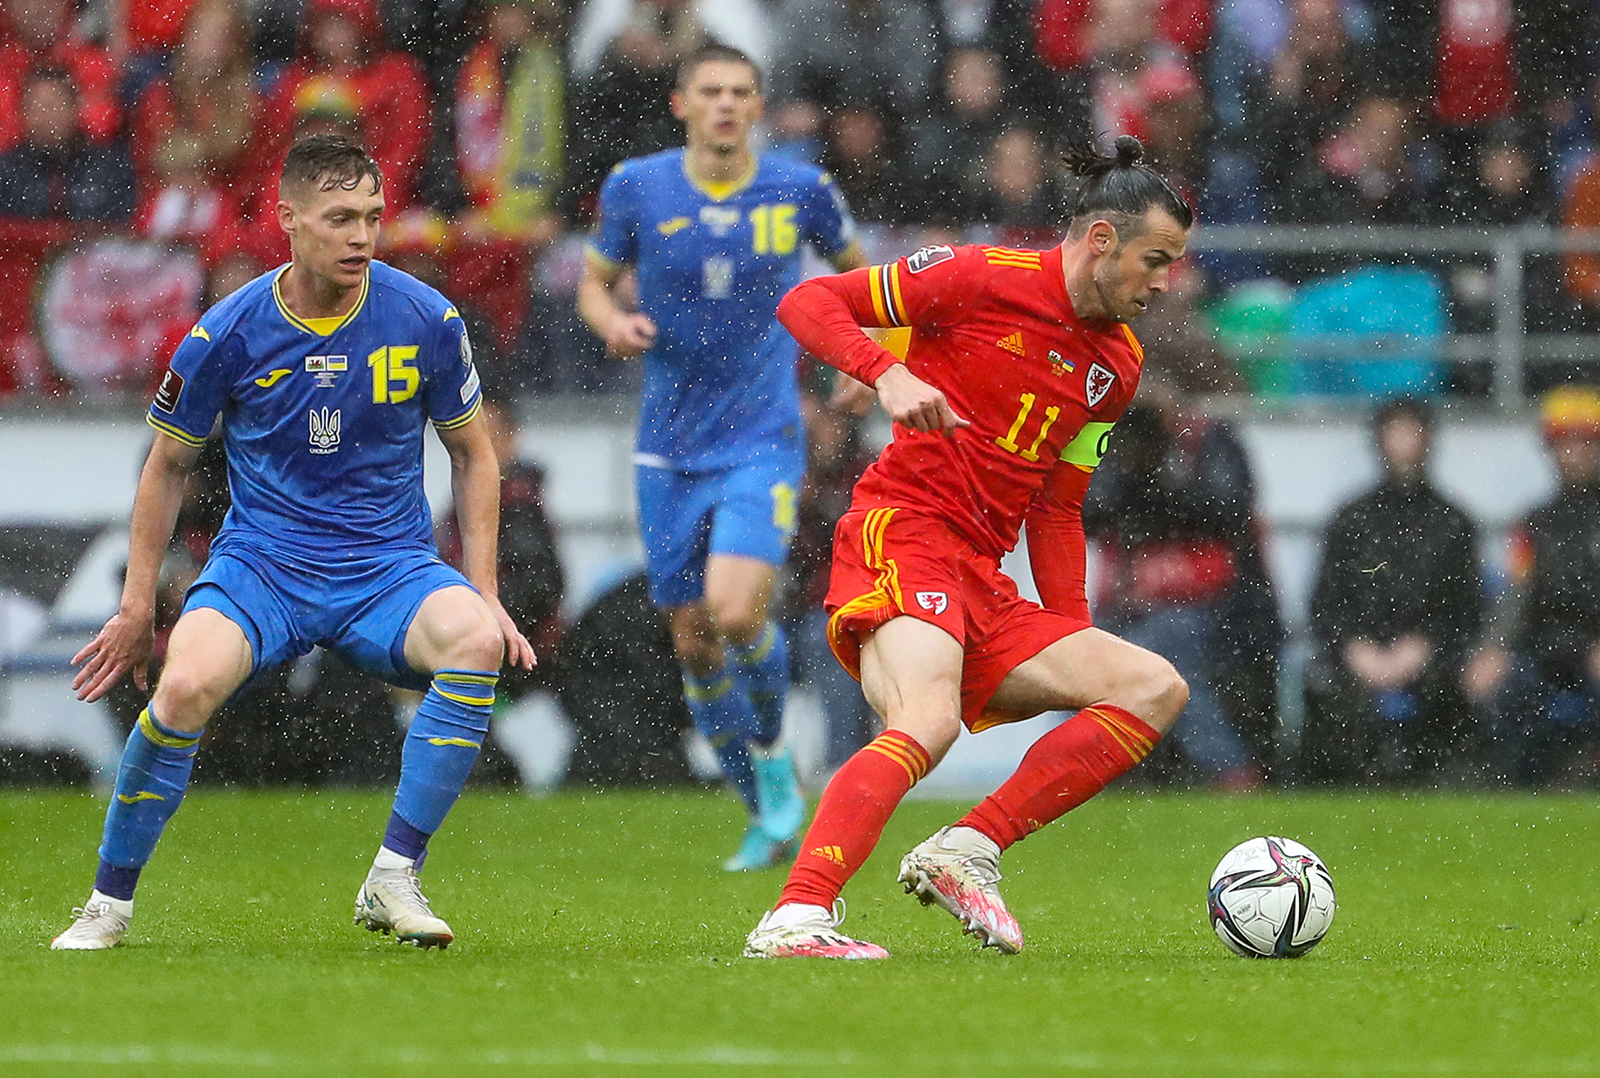 Wales' striker Gareth Bale (R) fights for the ball with Ukraine's midfielder Viktor Tsygankov during the FIFA World Cup 2022 play-off final qualifier football match between Wales and Ukraine at the Cardiff City Stadium in Cardiff, south Wales, on June 5.